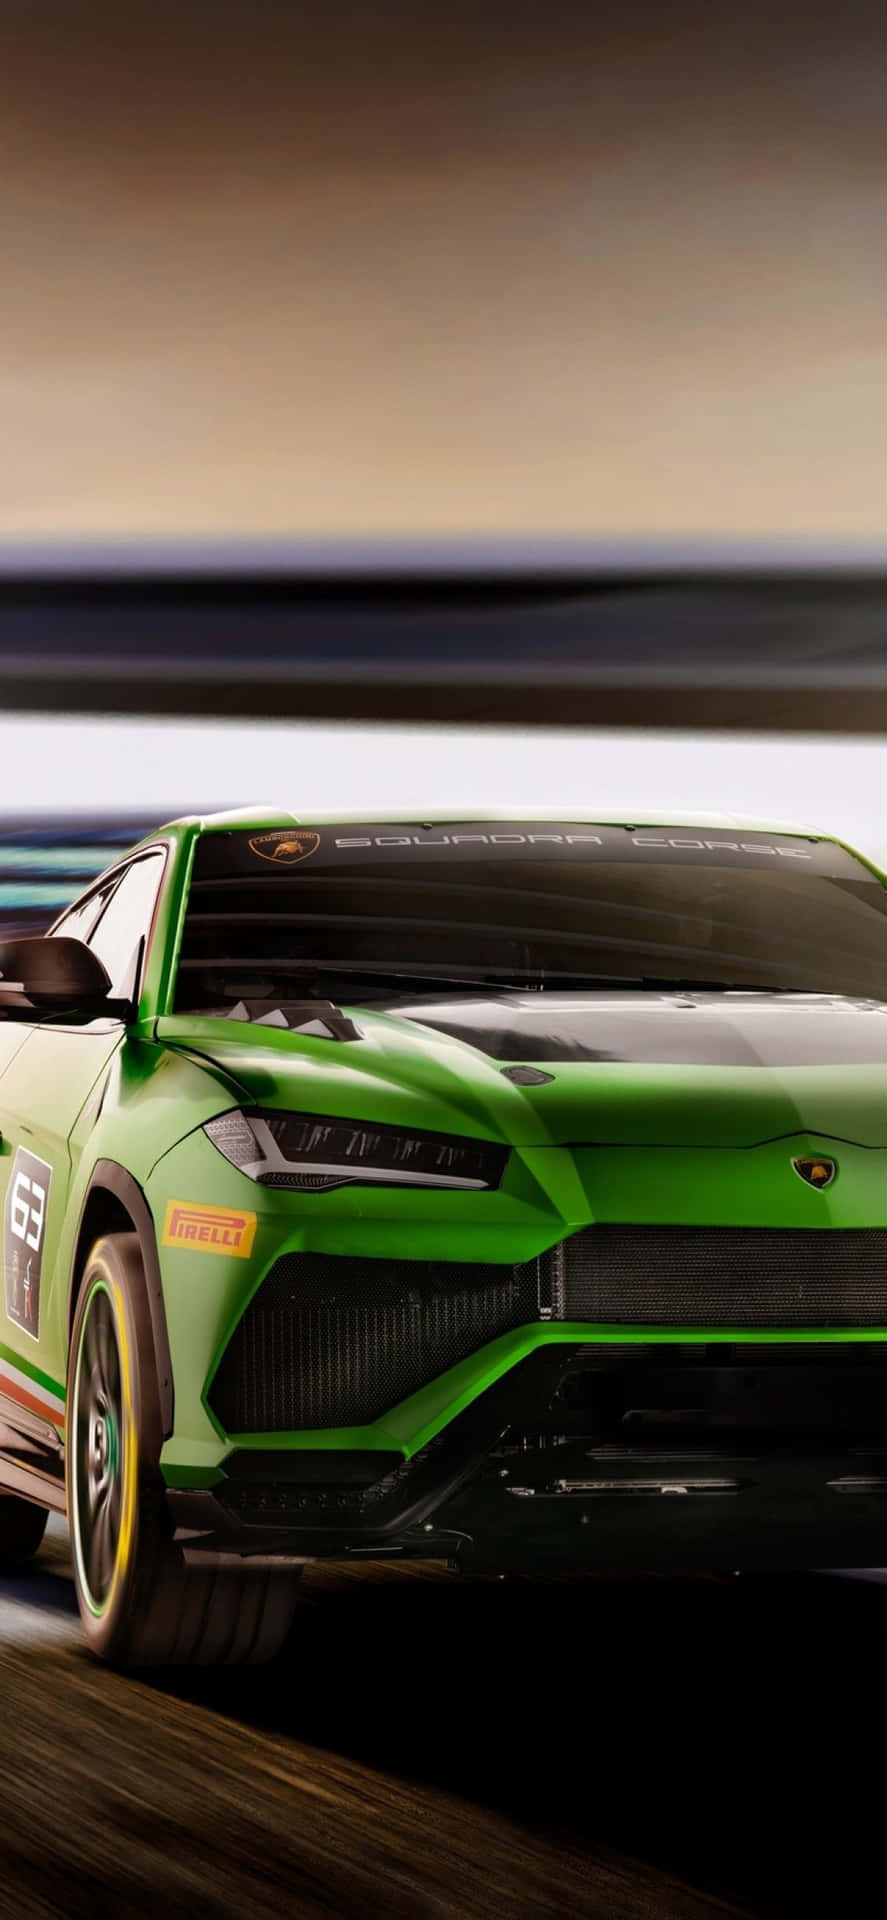 Feel the Power of the Wind in Your Hair With a Green Lamborghini iPhone Wallpaper